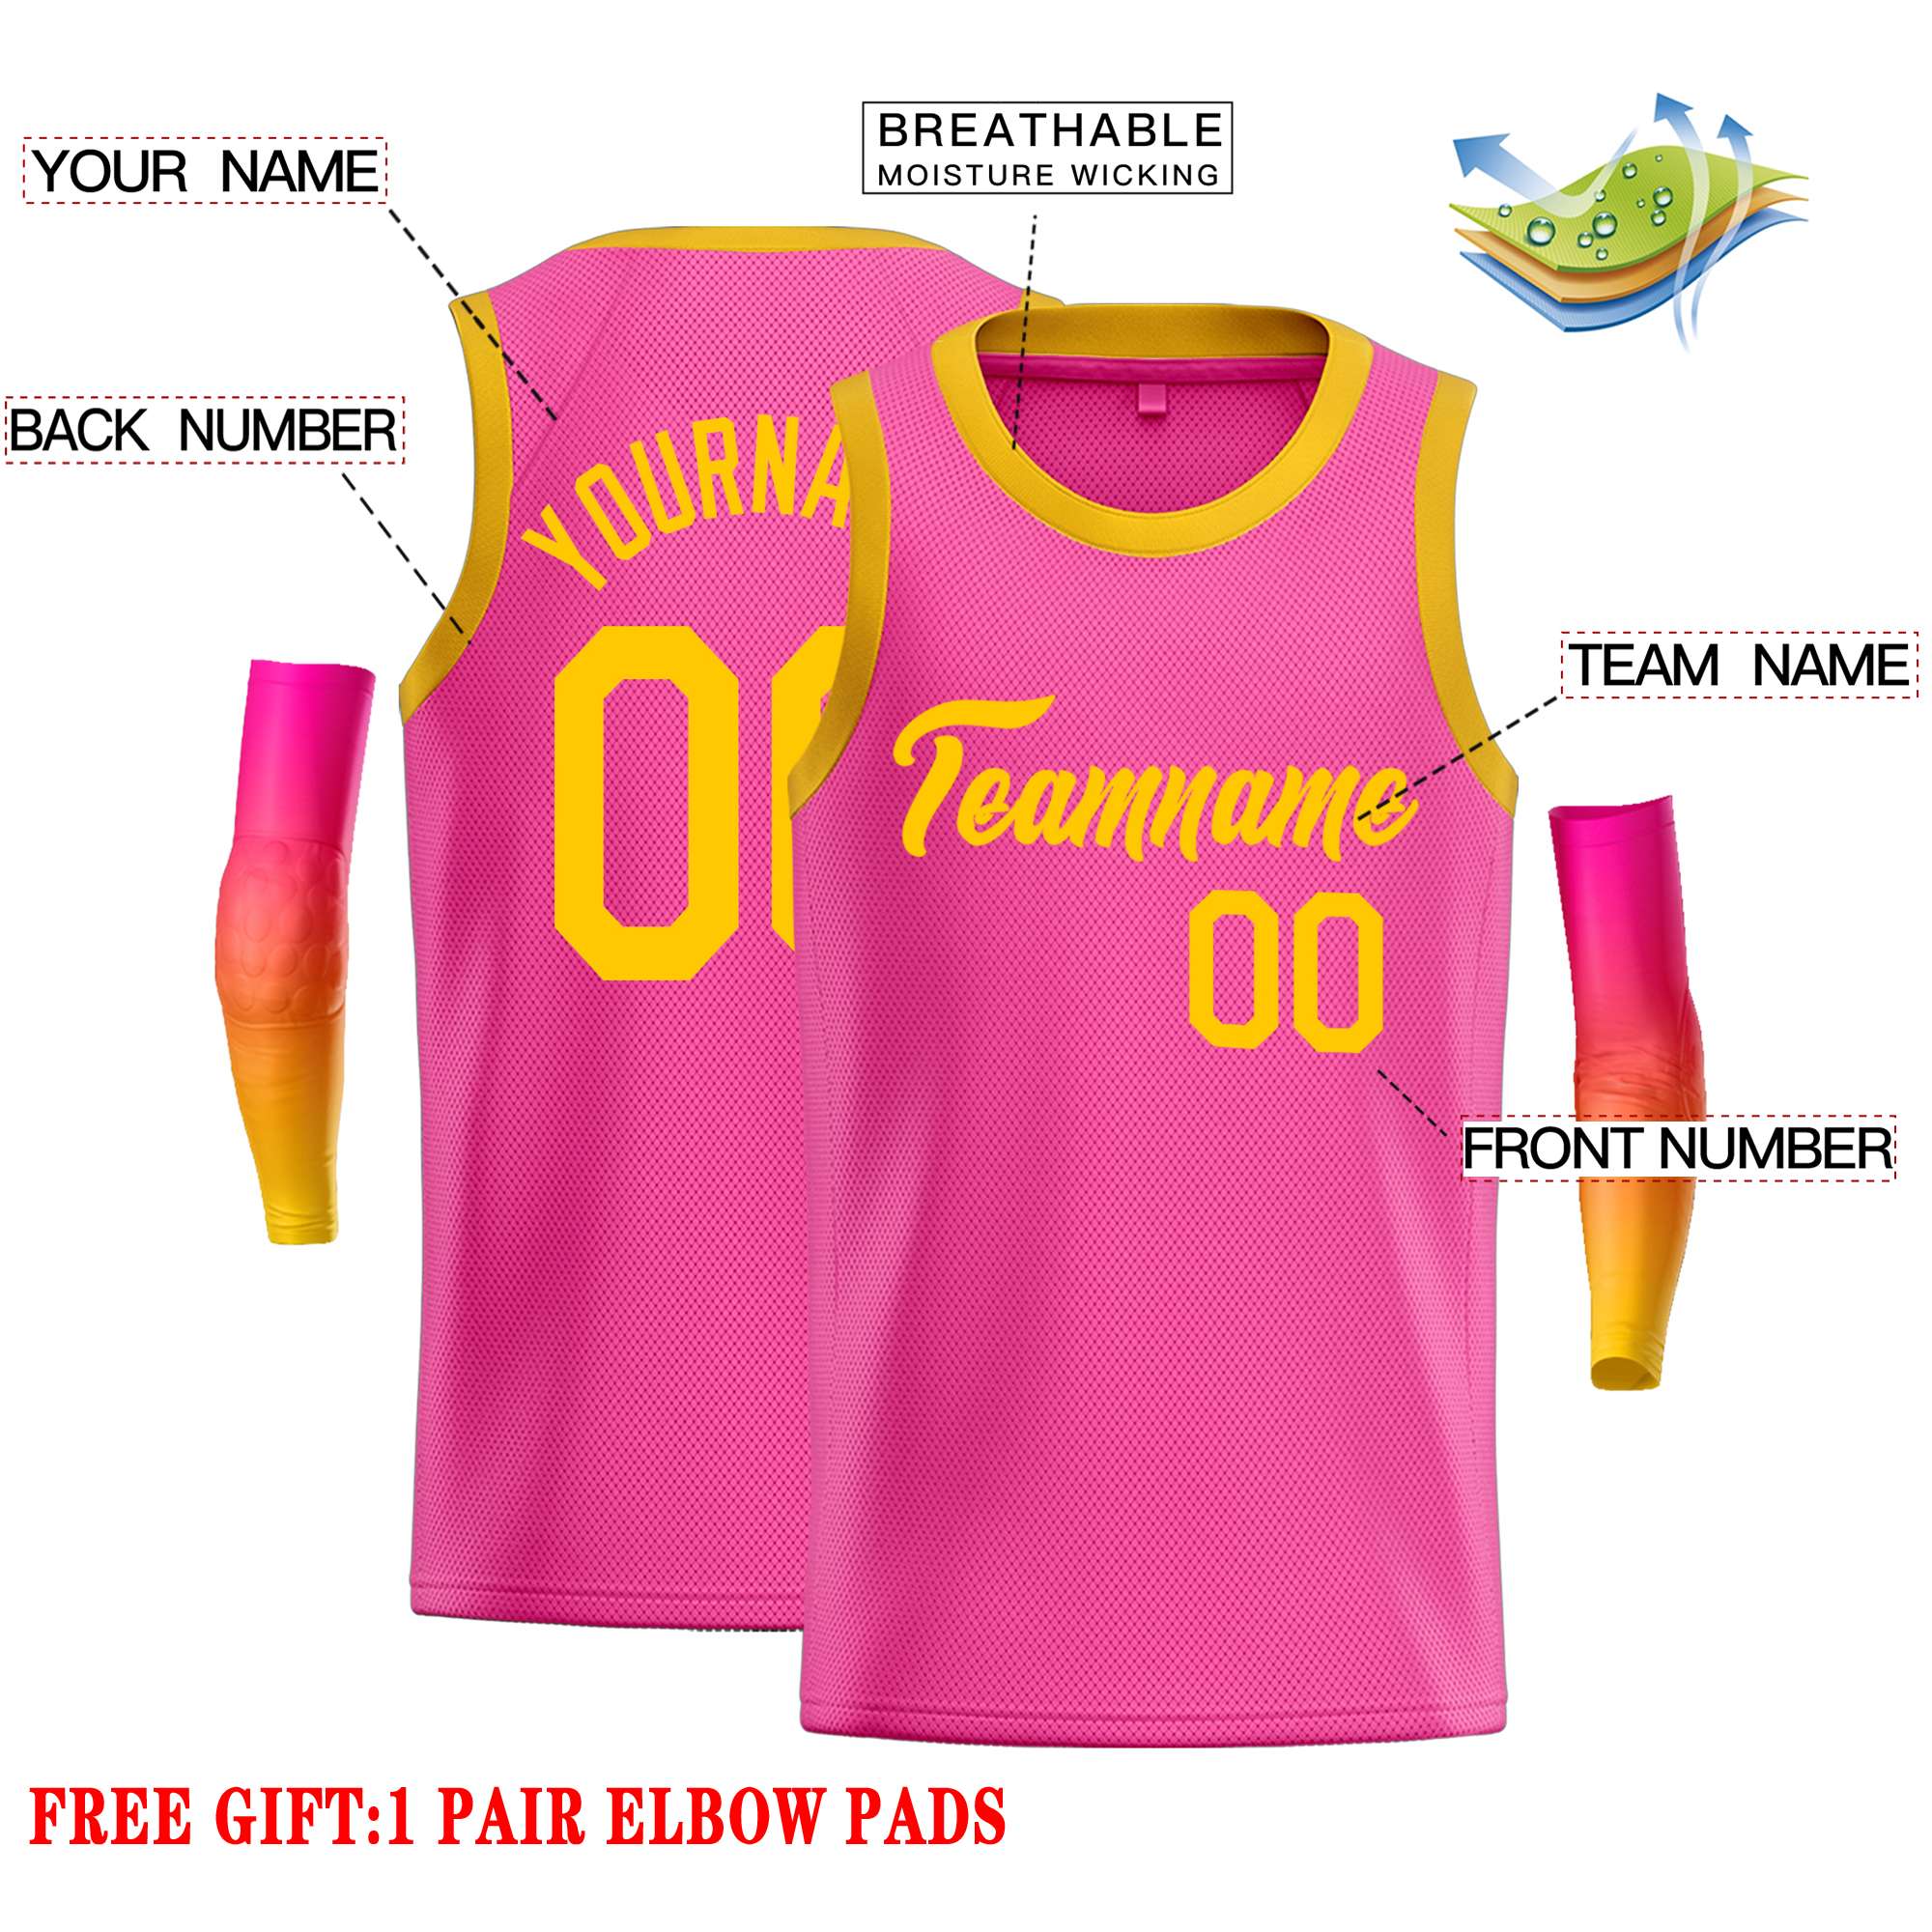 Wholesale High quality embroidered Basketball jerseys Sonics no